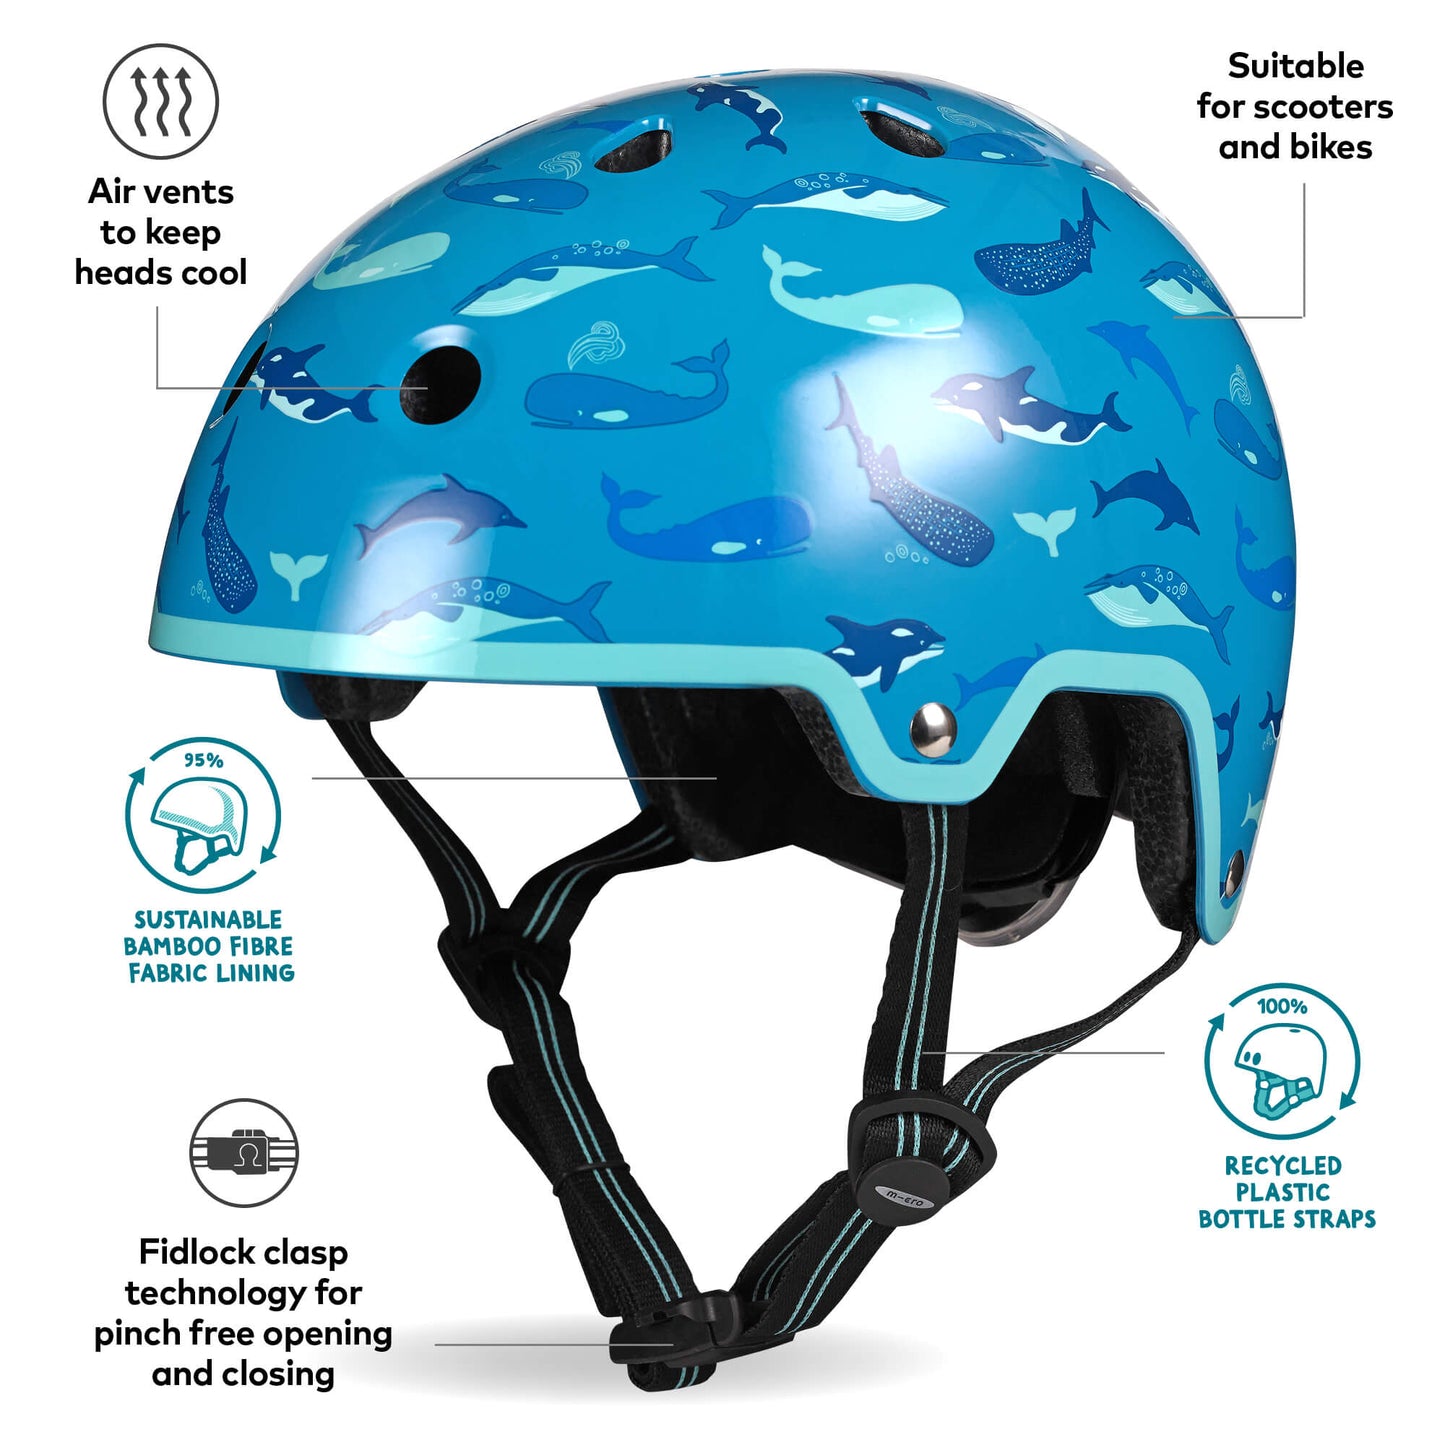 Micro Scooter Kids Helmet Deluxe Patterned Size Small 51-54cm